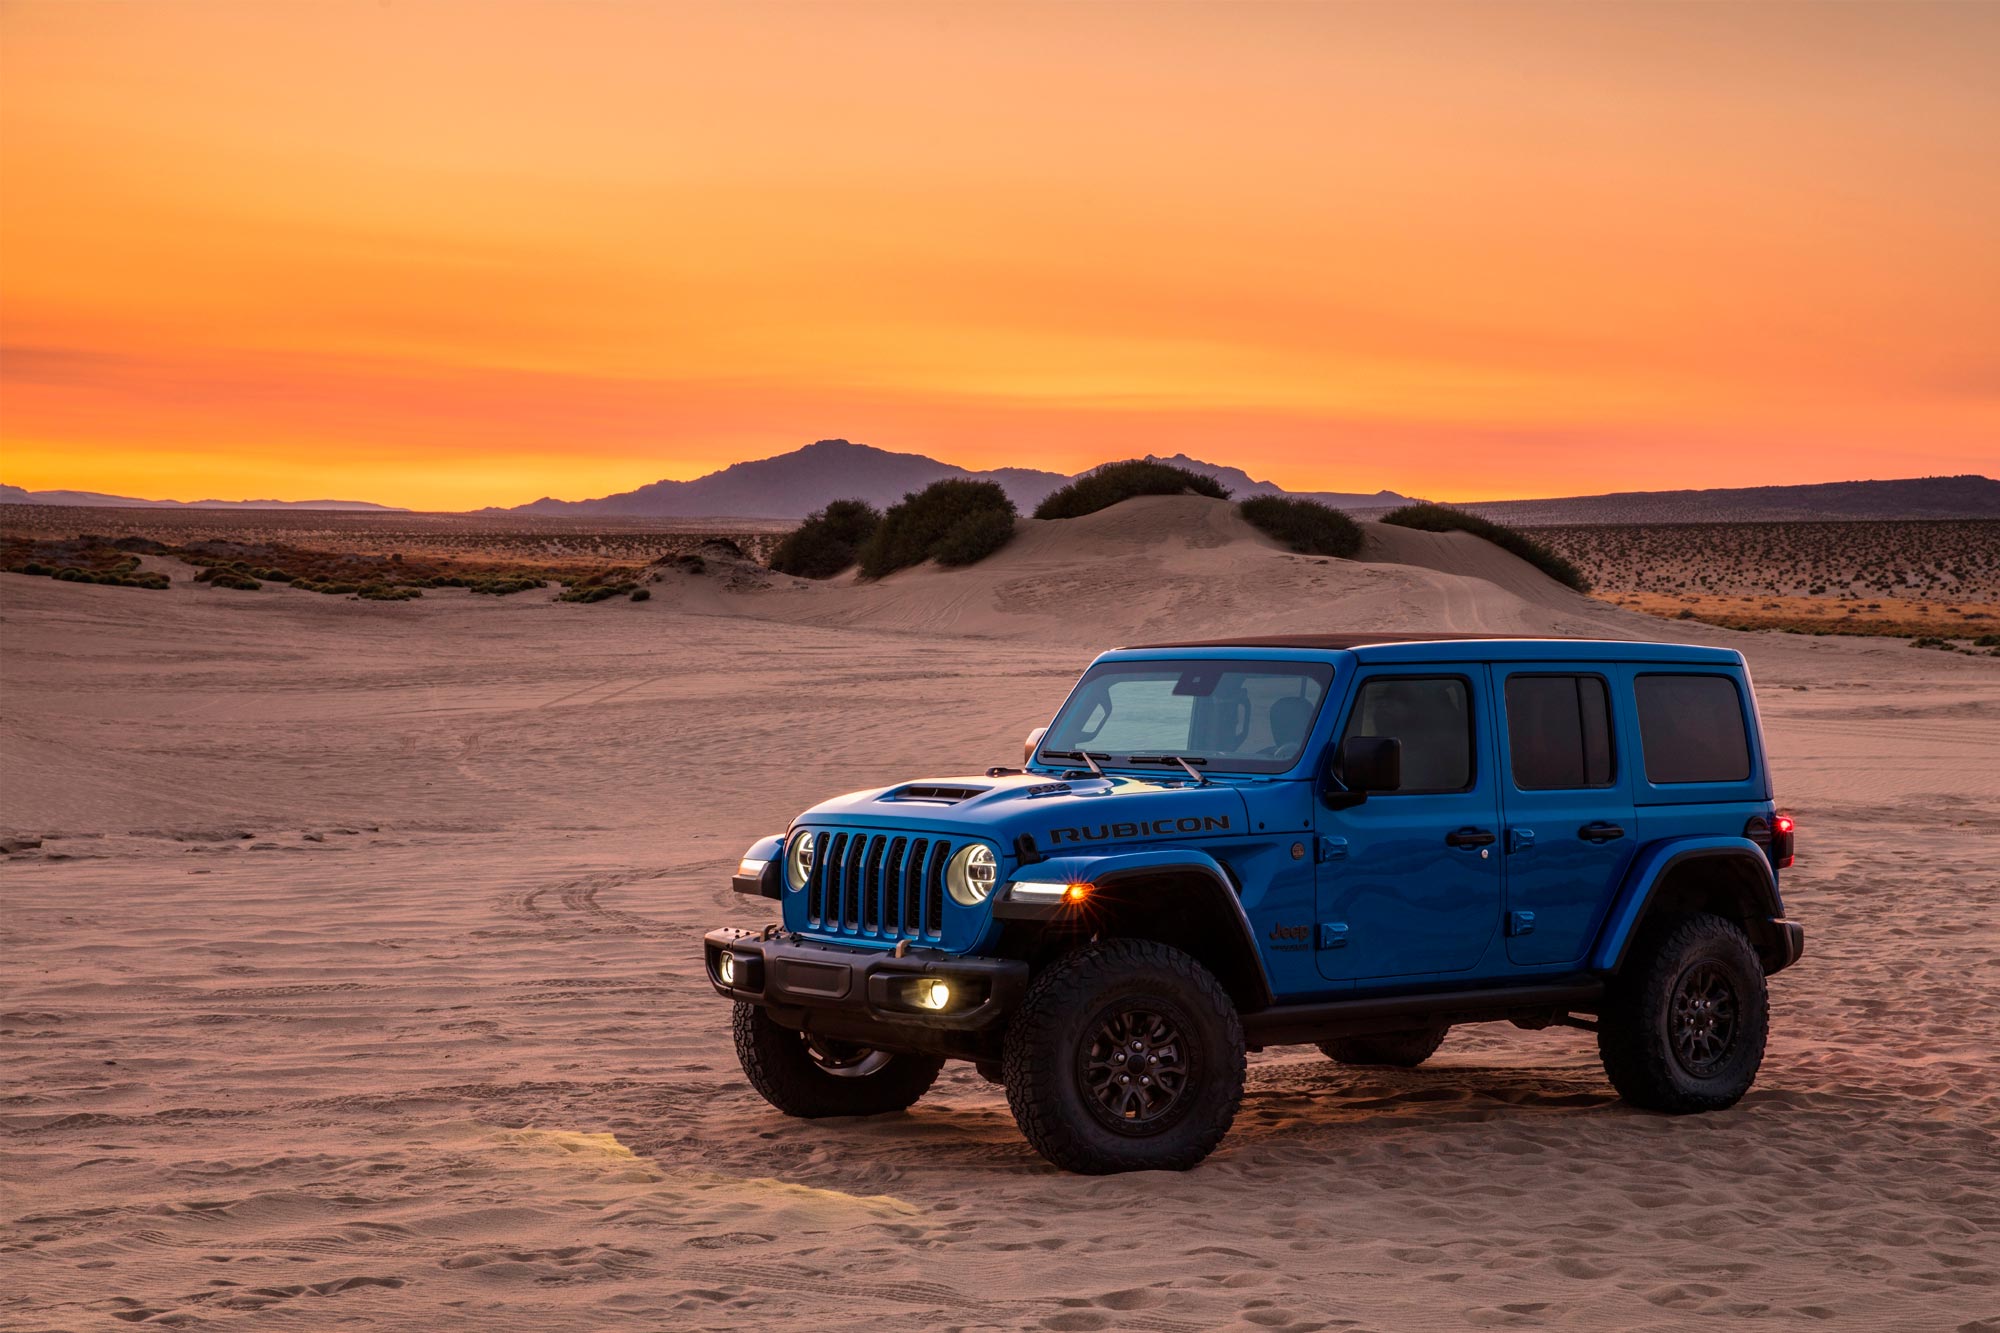 To Jeep Wrangler Rubicon 392 είναι το “2022 SUV of the Year”